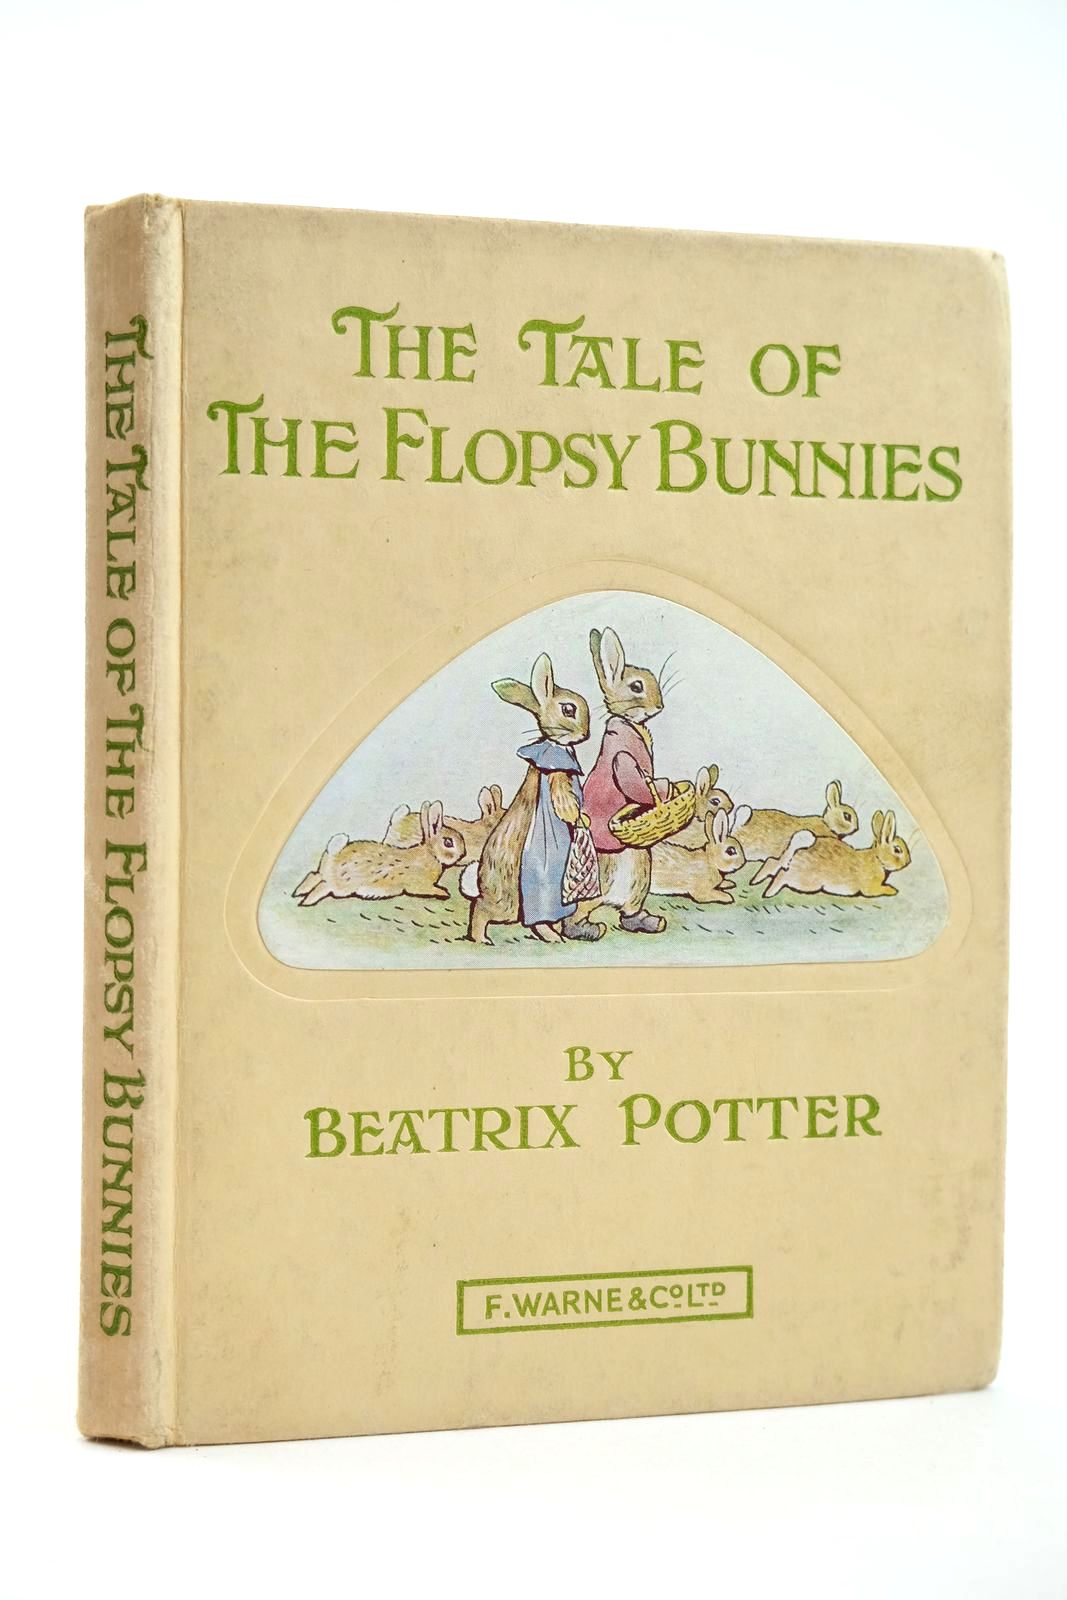 Photo of THE TALE OF THE FLOPSY BUNNIES written by Potter, Beatrix illustrated by Potter, Beatrix published by Frederick Warne &amp; Co Ltd. (STOCK CODE: 2131892)  for sale by Stella & Rose's Books